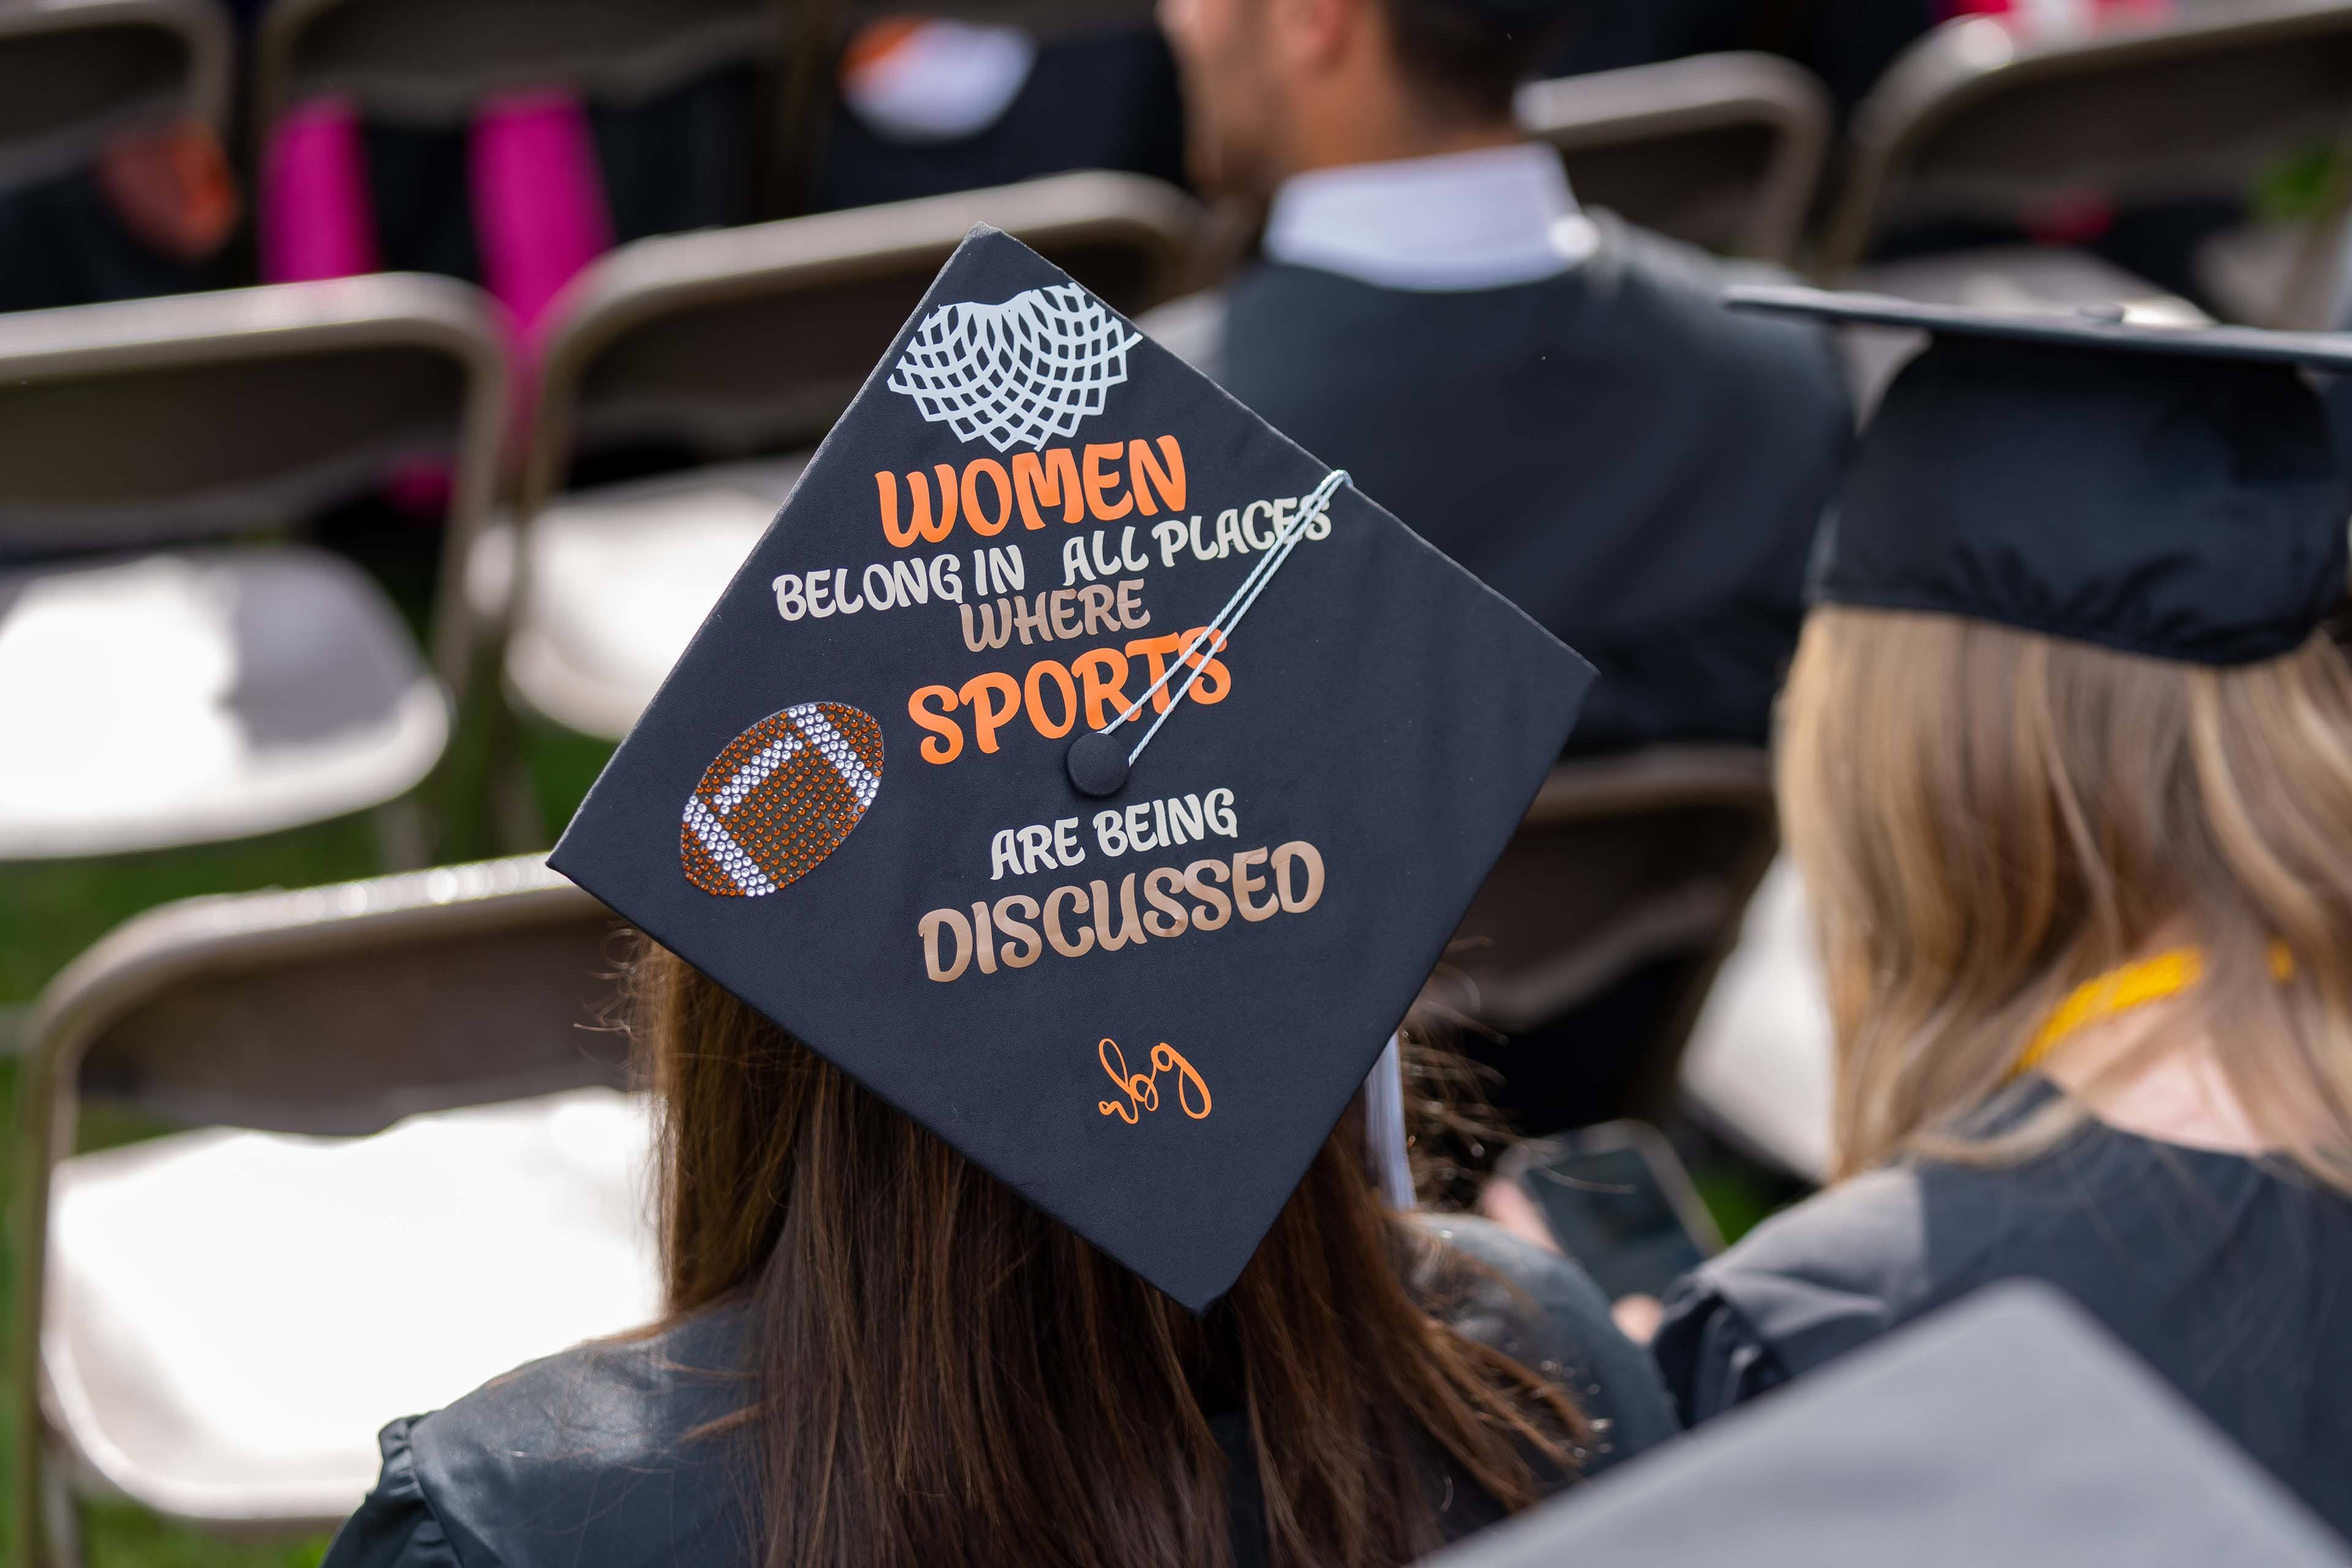 Graduation cap says, "Women belong in all places where sports are being discussed" 